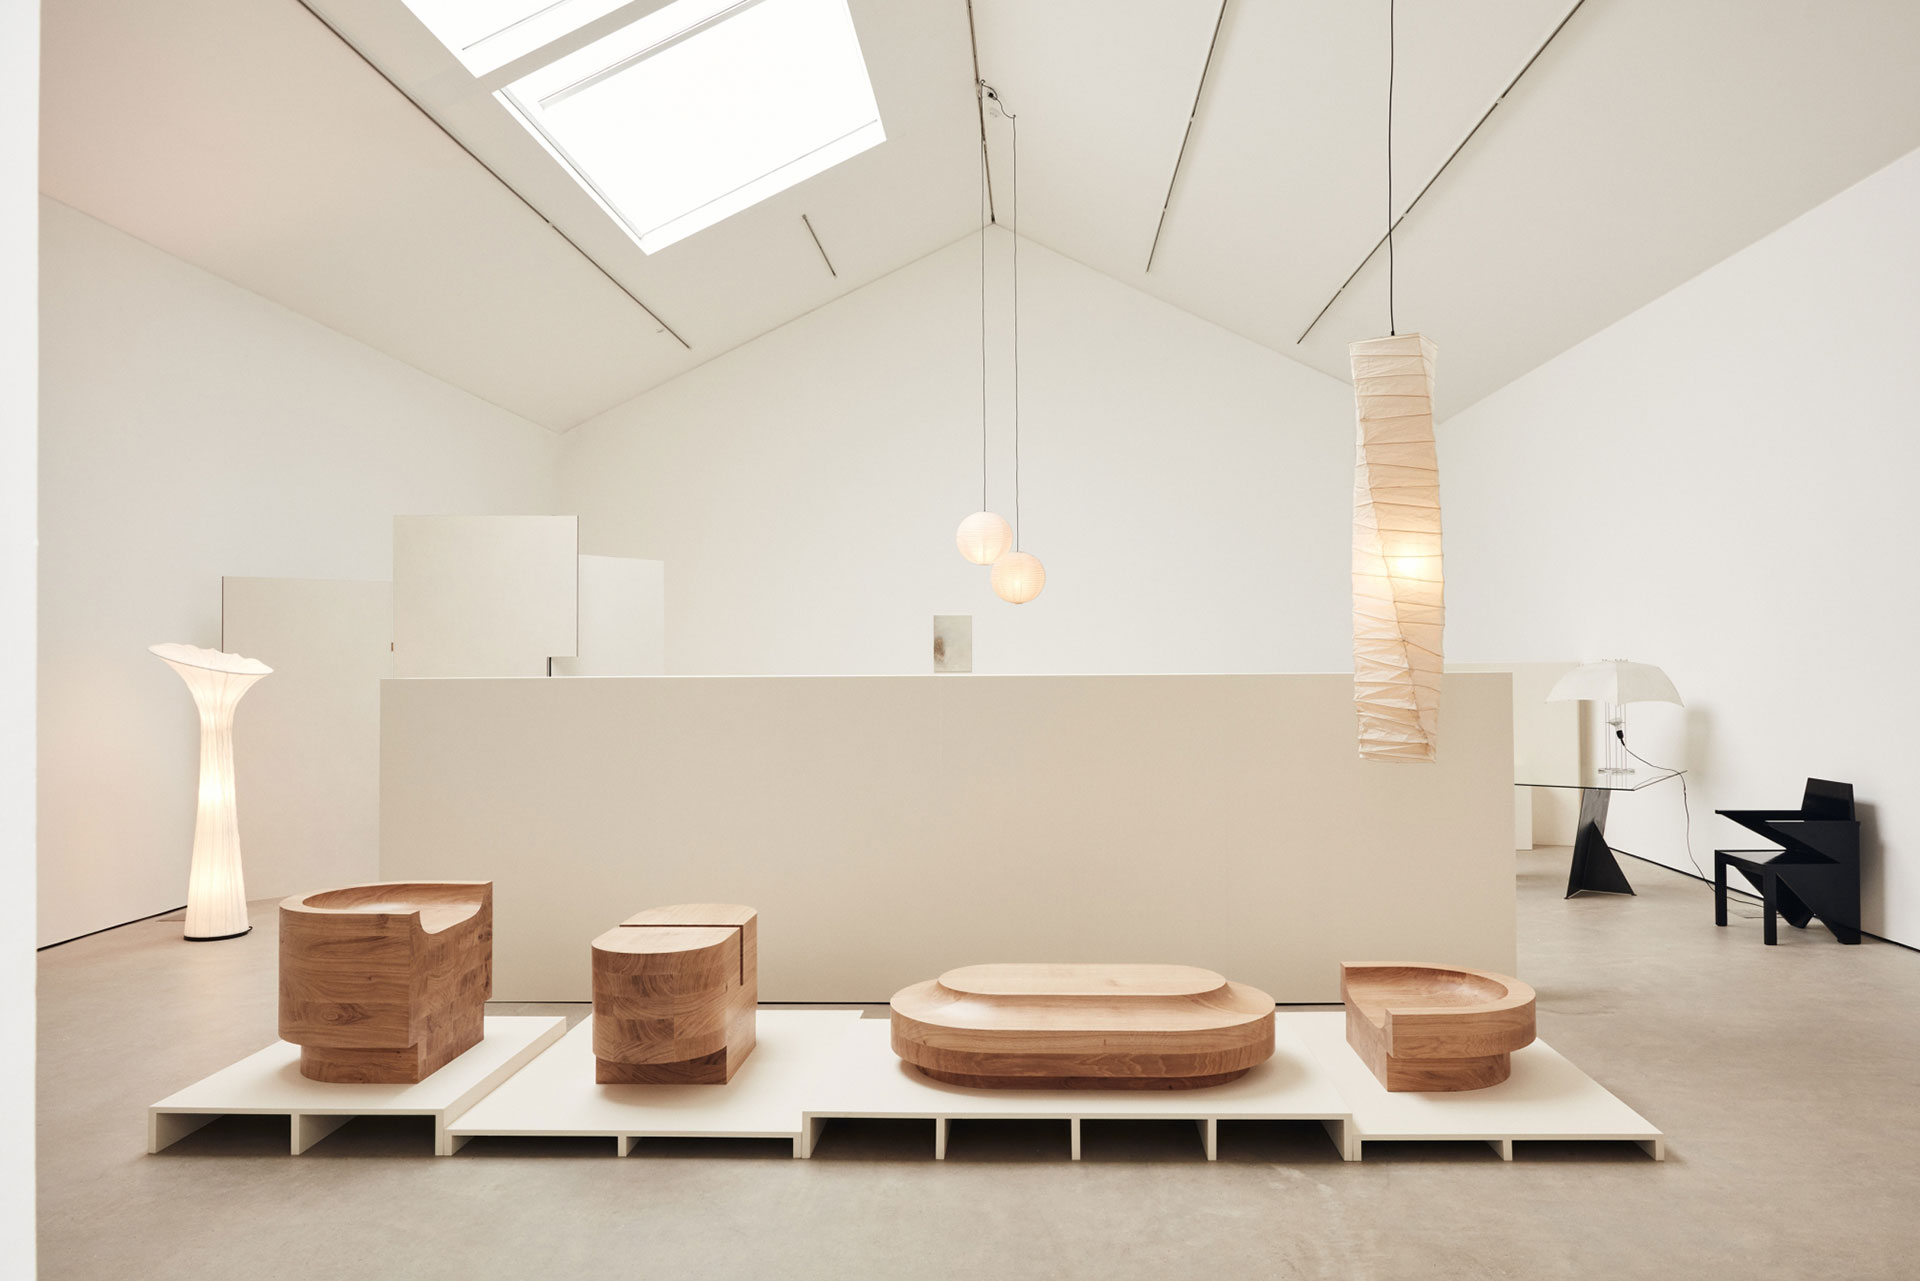 Low tables and Low chairs are inspired by Japanese zen settings